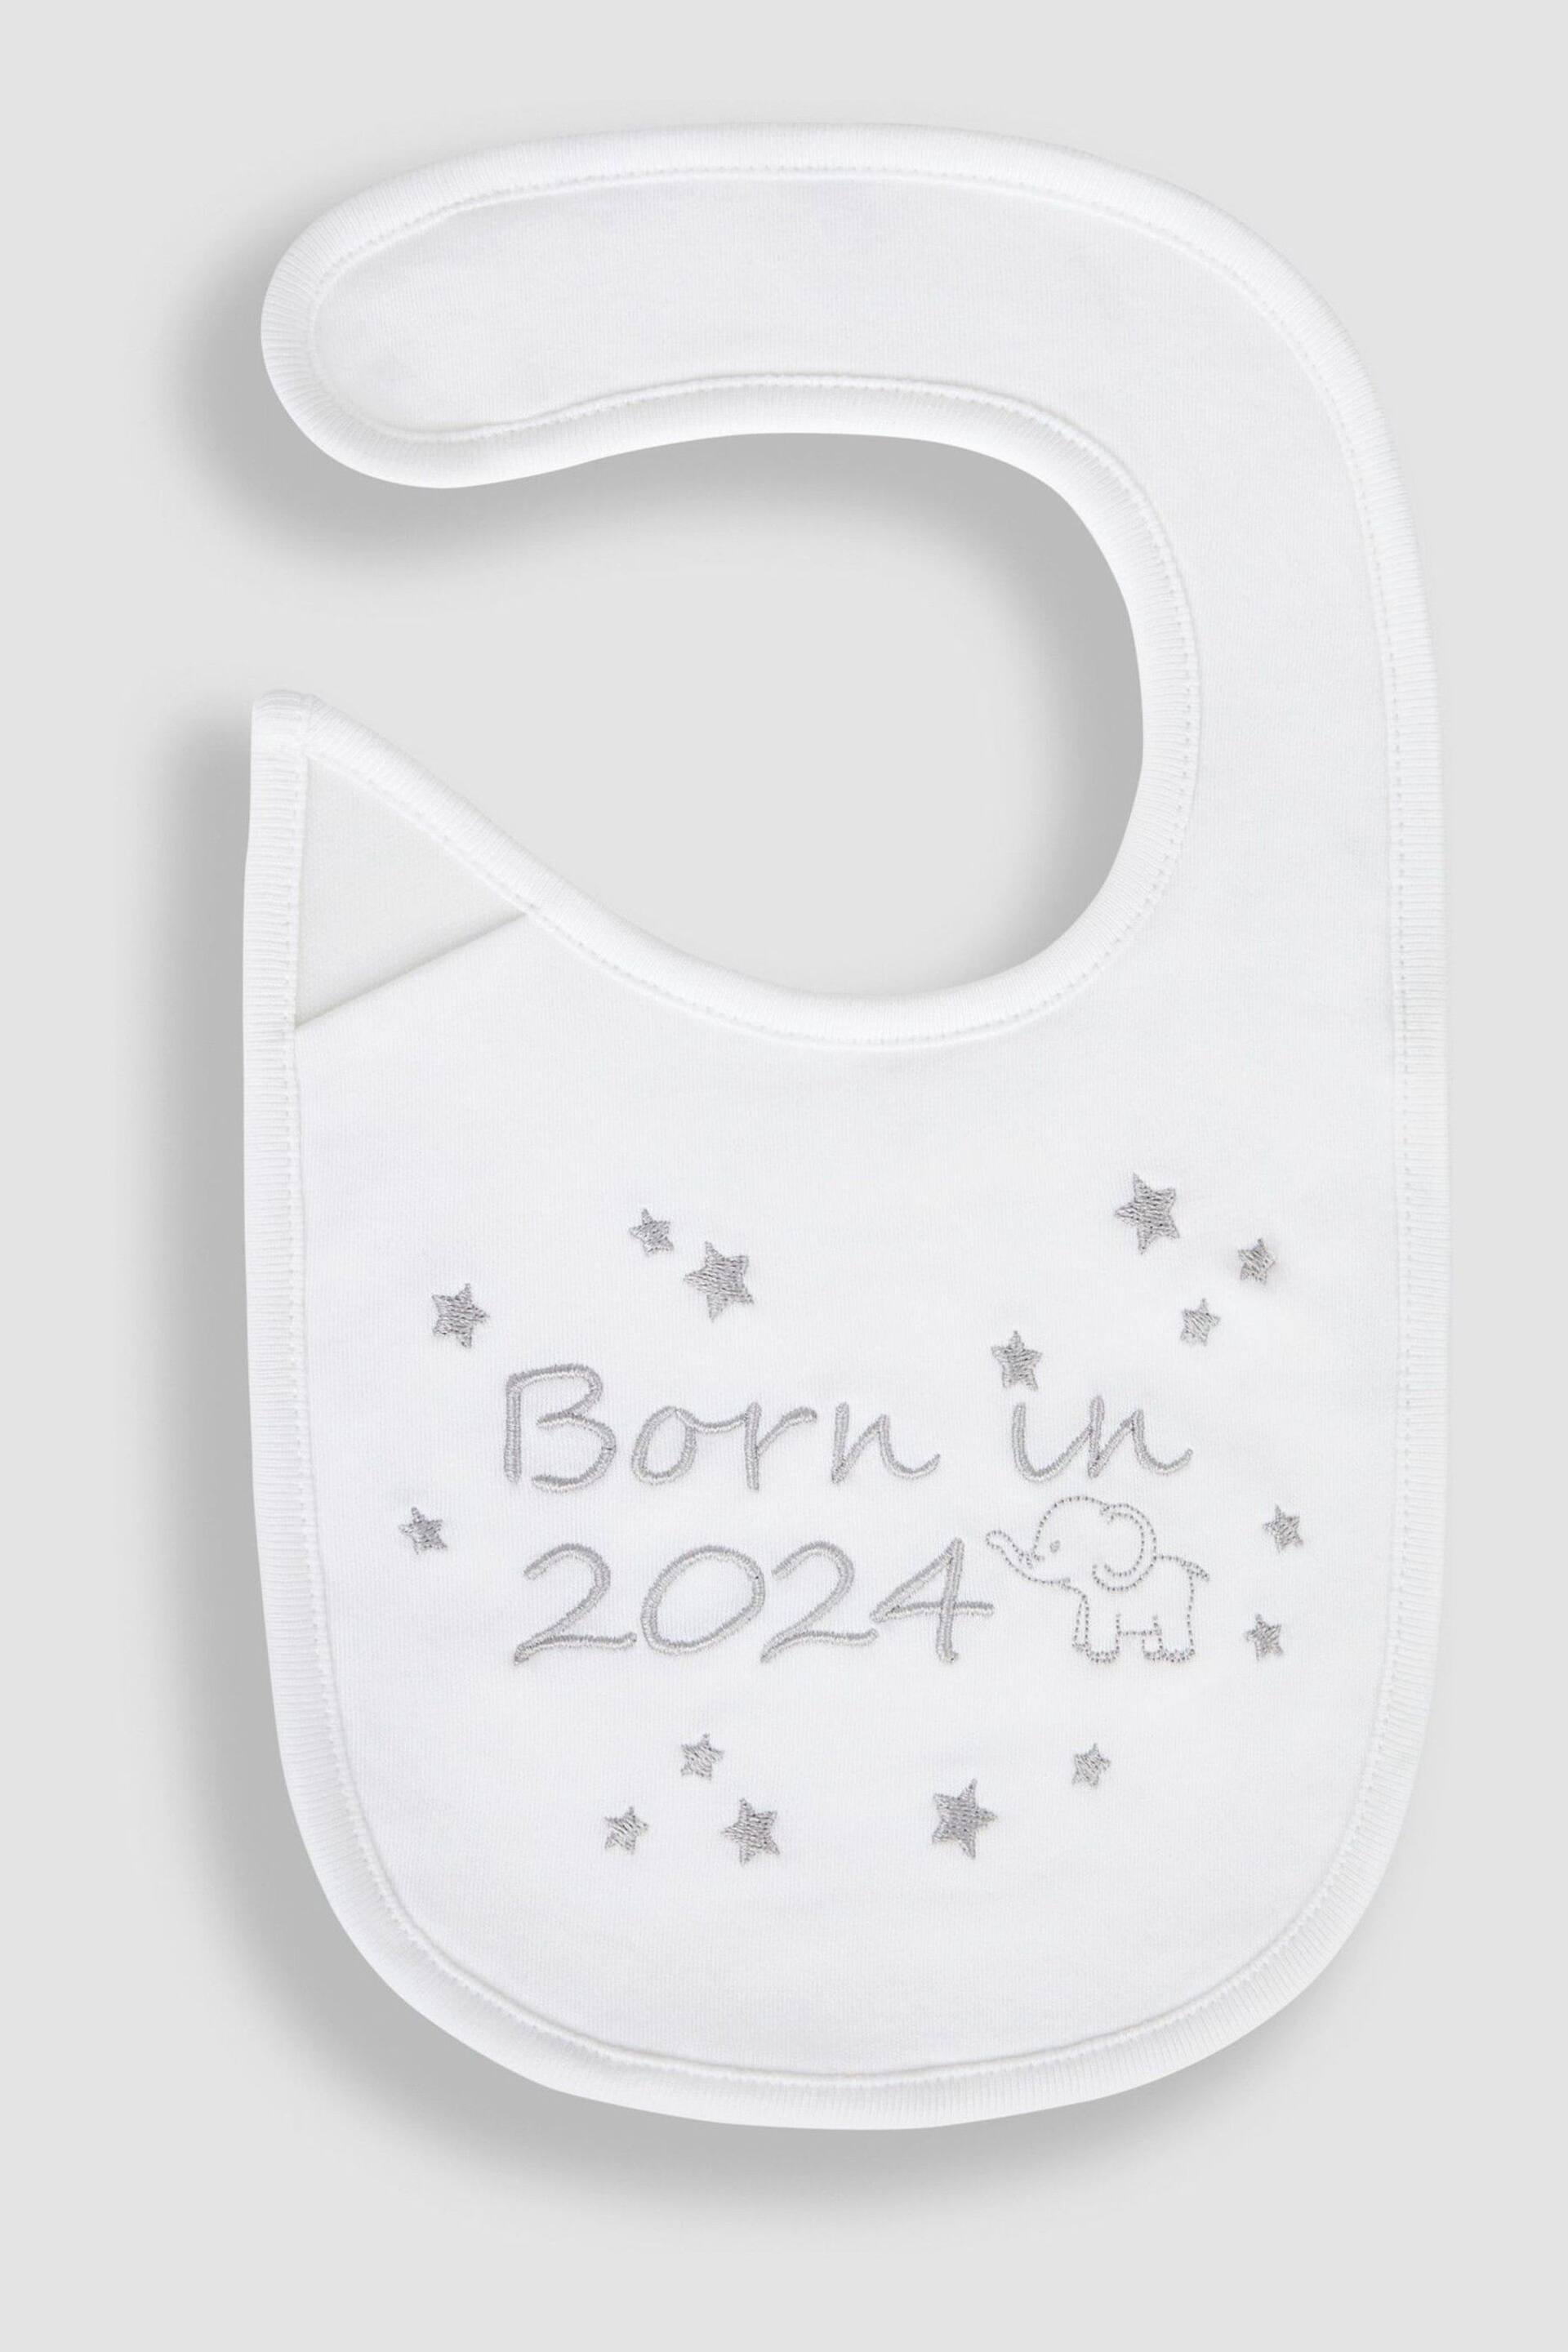 JoJo Maman Bébé White Born in 2024 Embroidered Bibs - Image 1 of 3